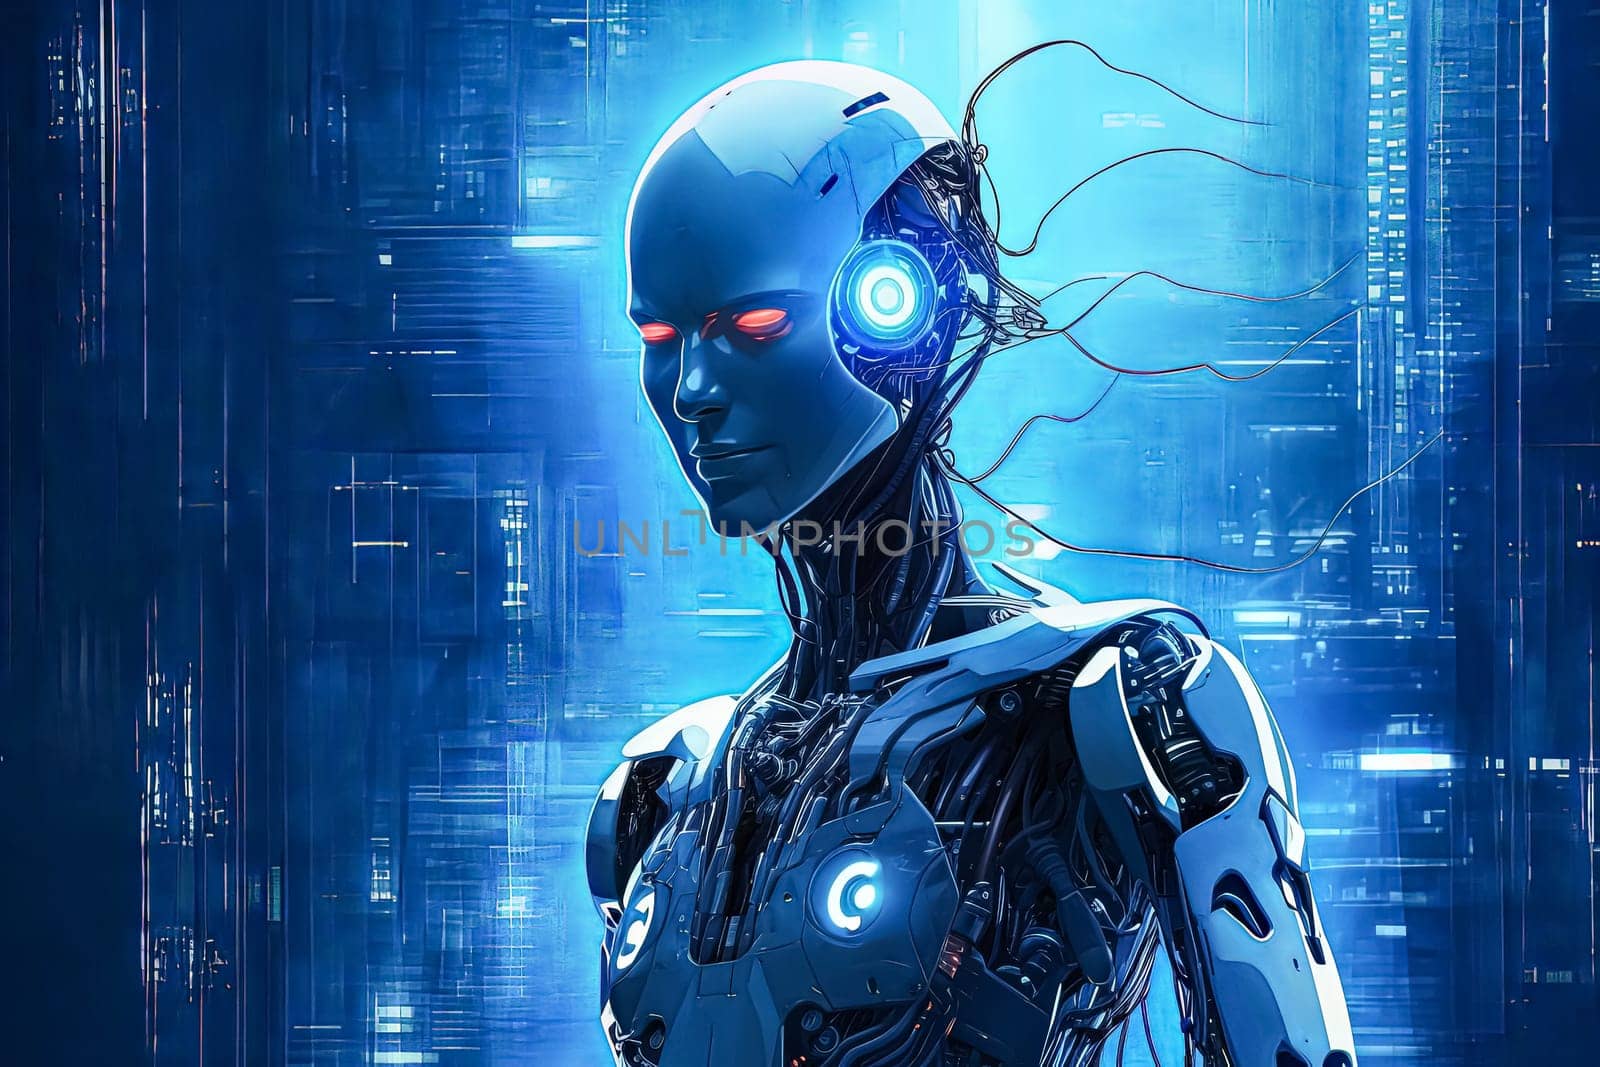 A female robot model poses against a vibrant blue background by Alla_Morozova93